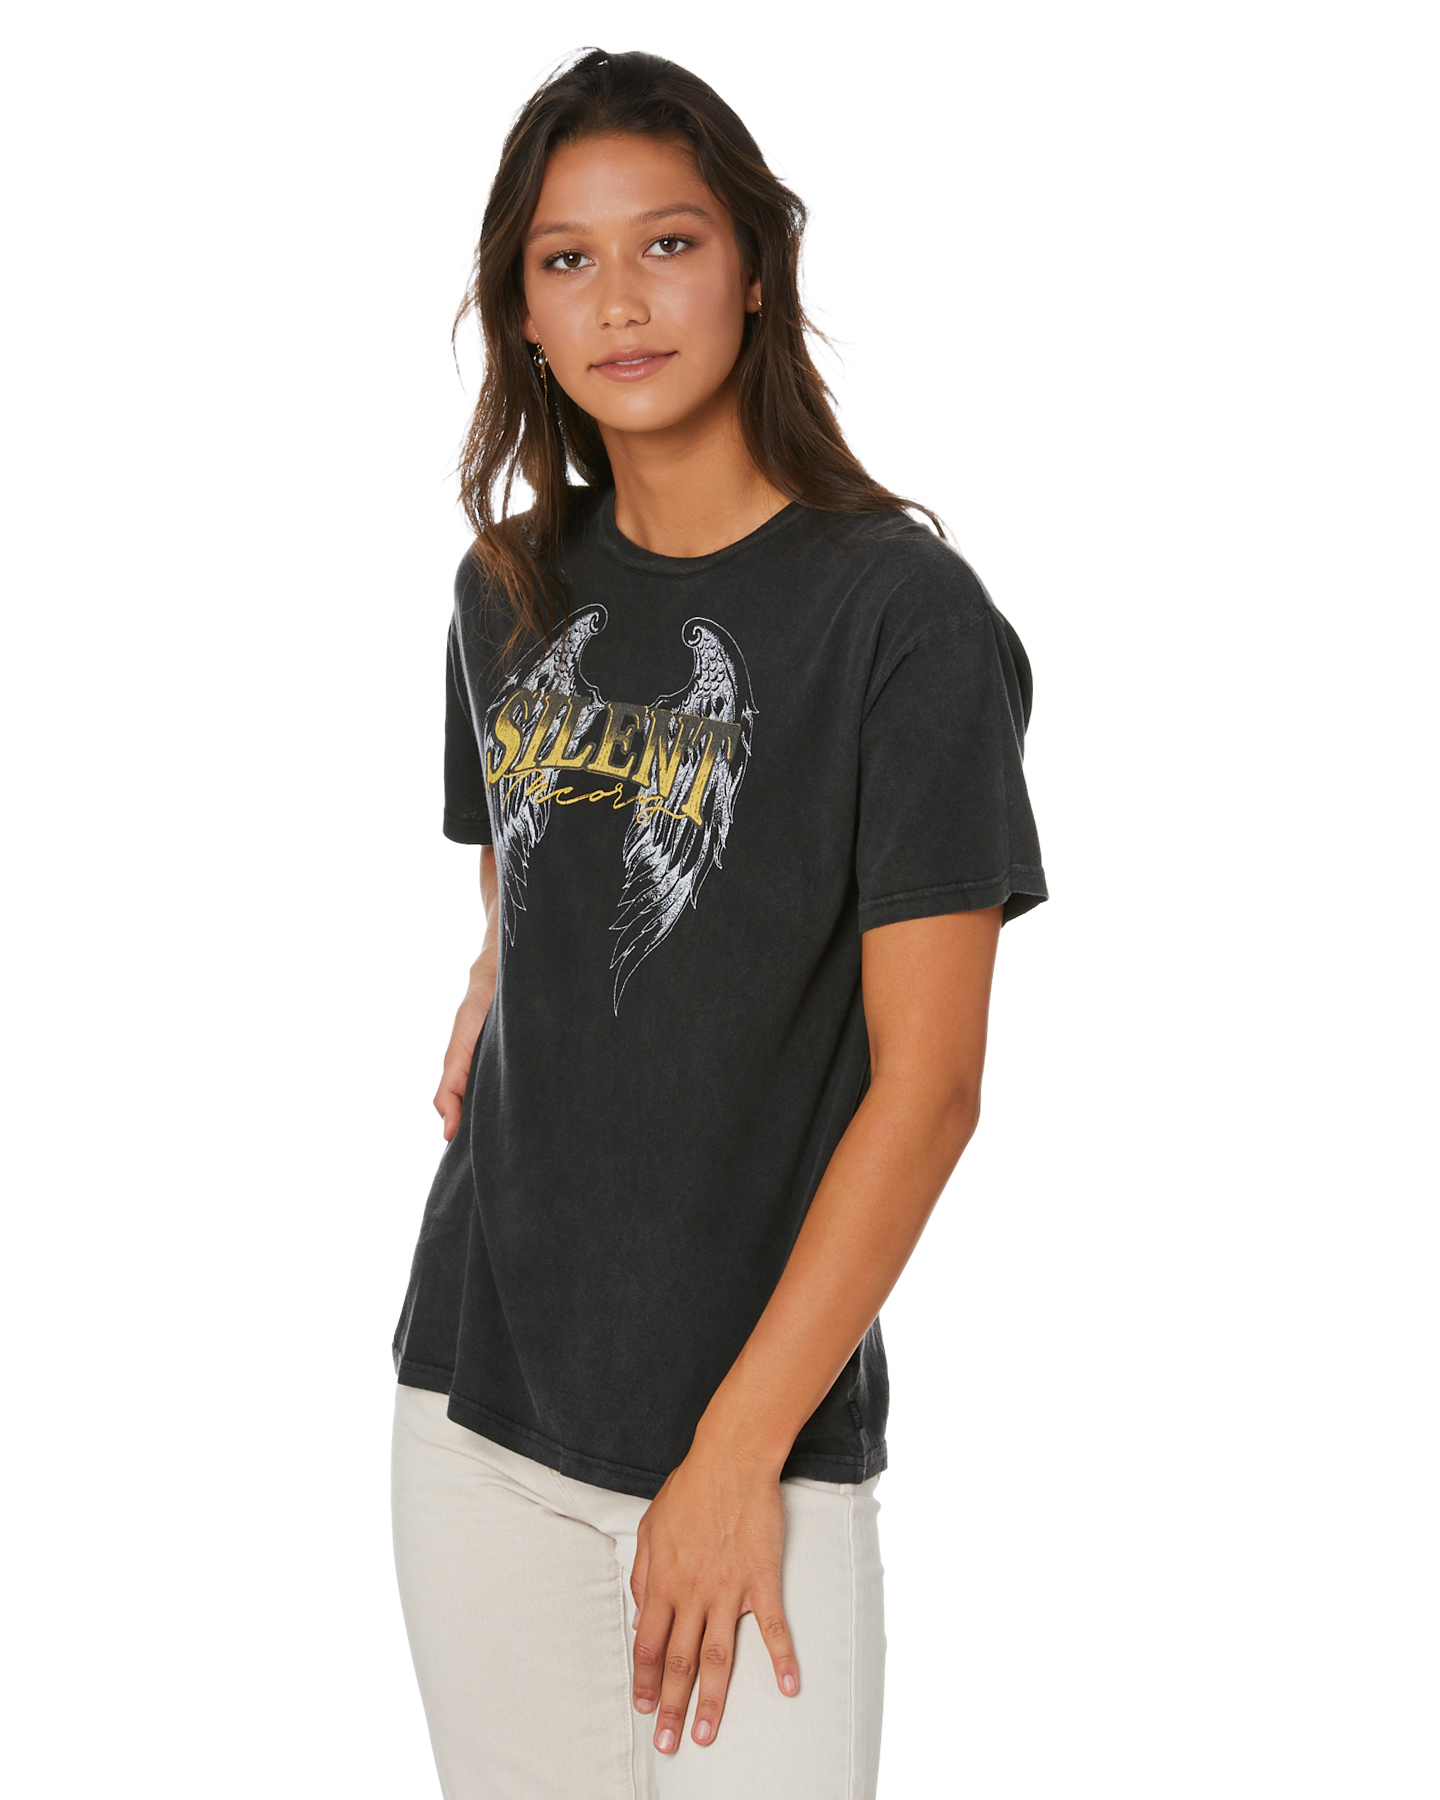 Silent Theory Bandit Tie Tee - Washed Black | SurfStitch